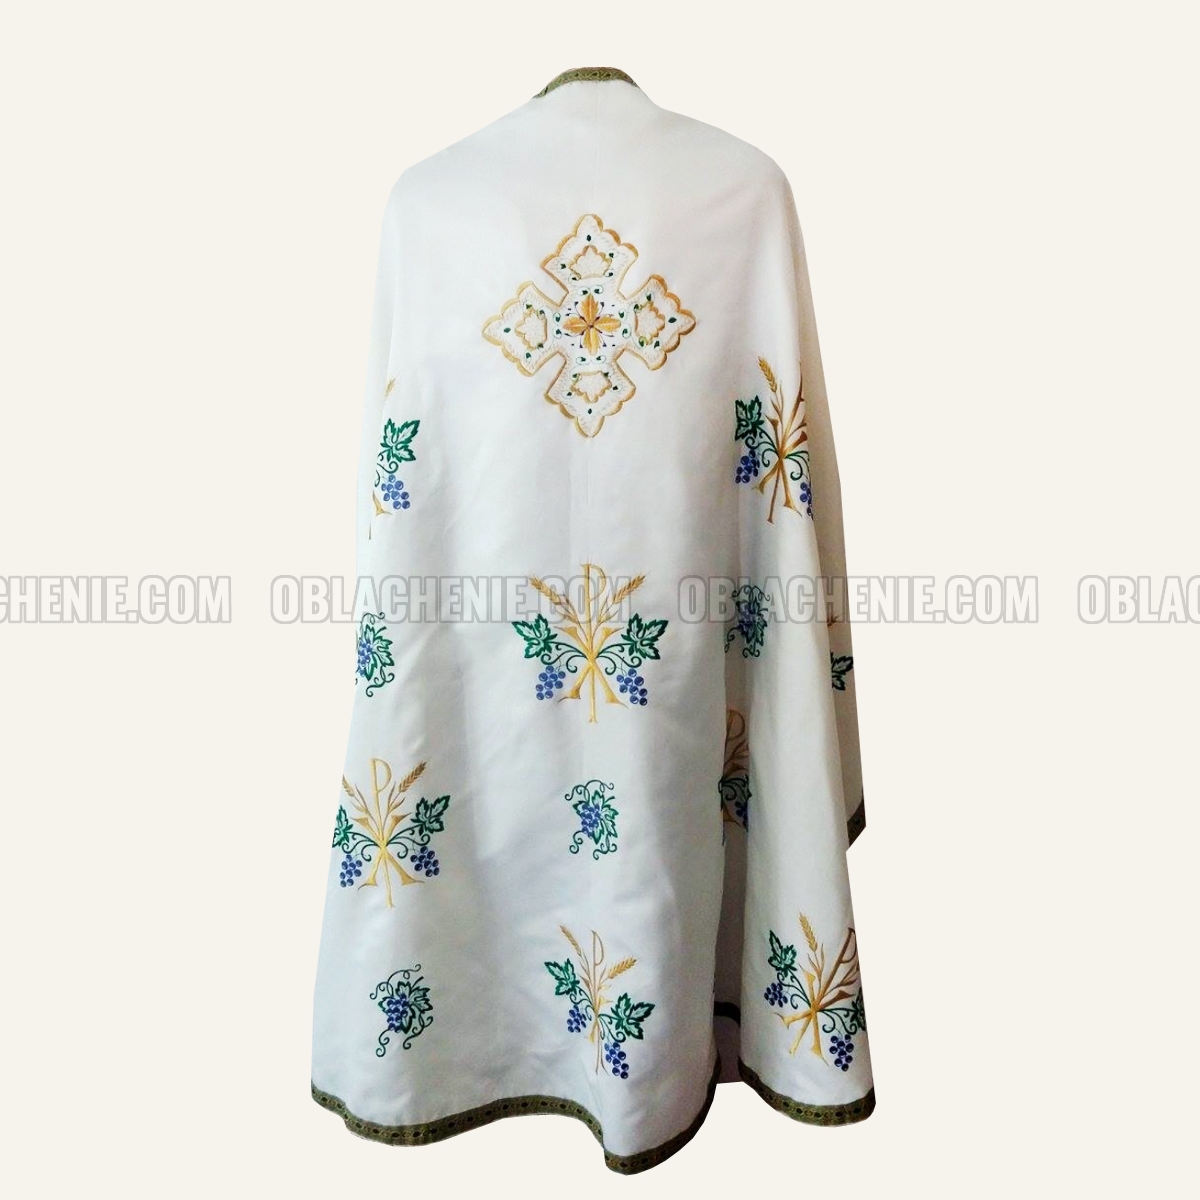 Embroidered priest's vestments 10252